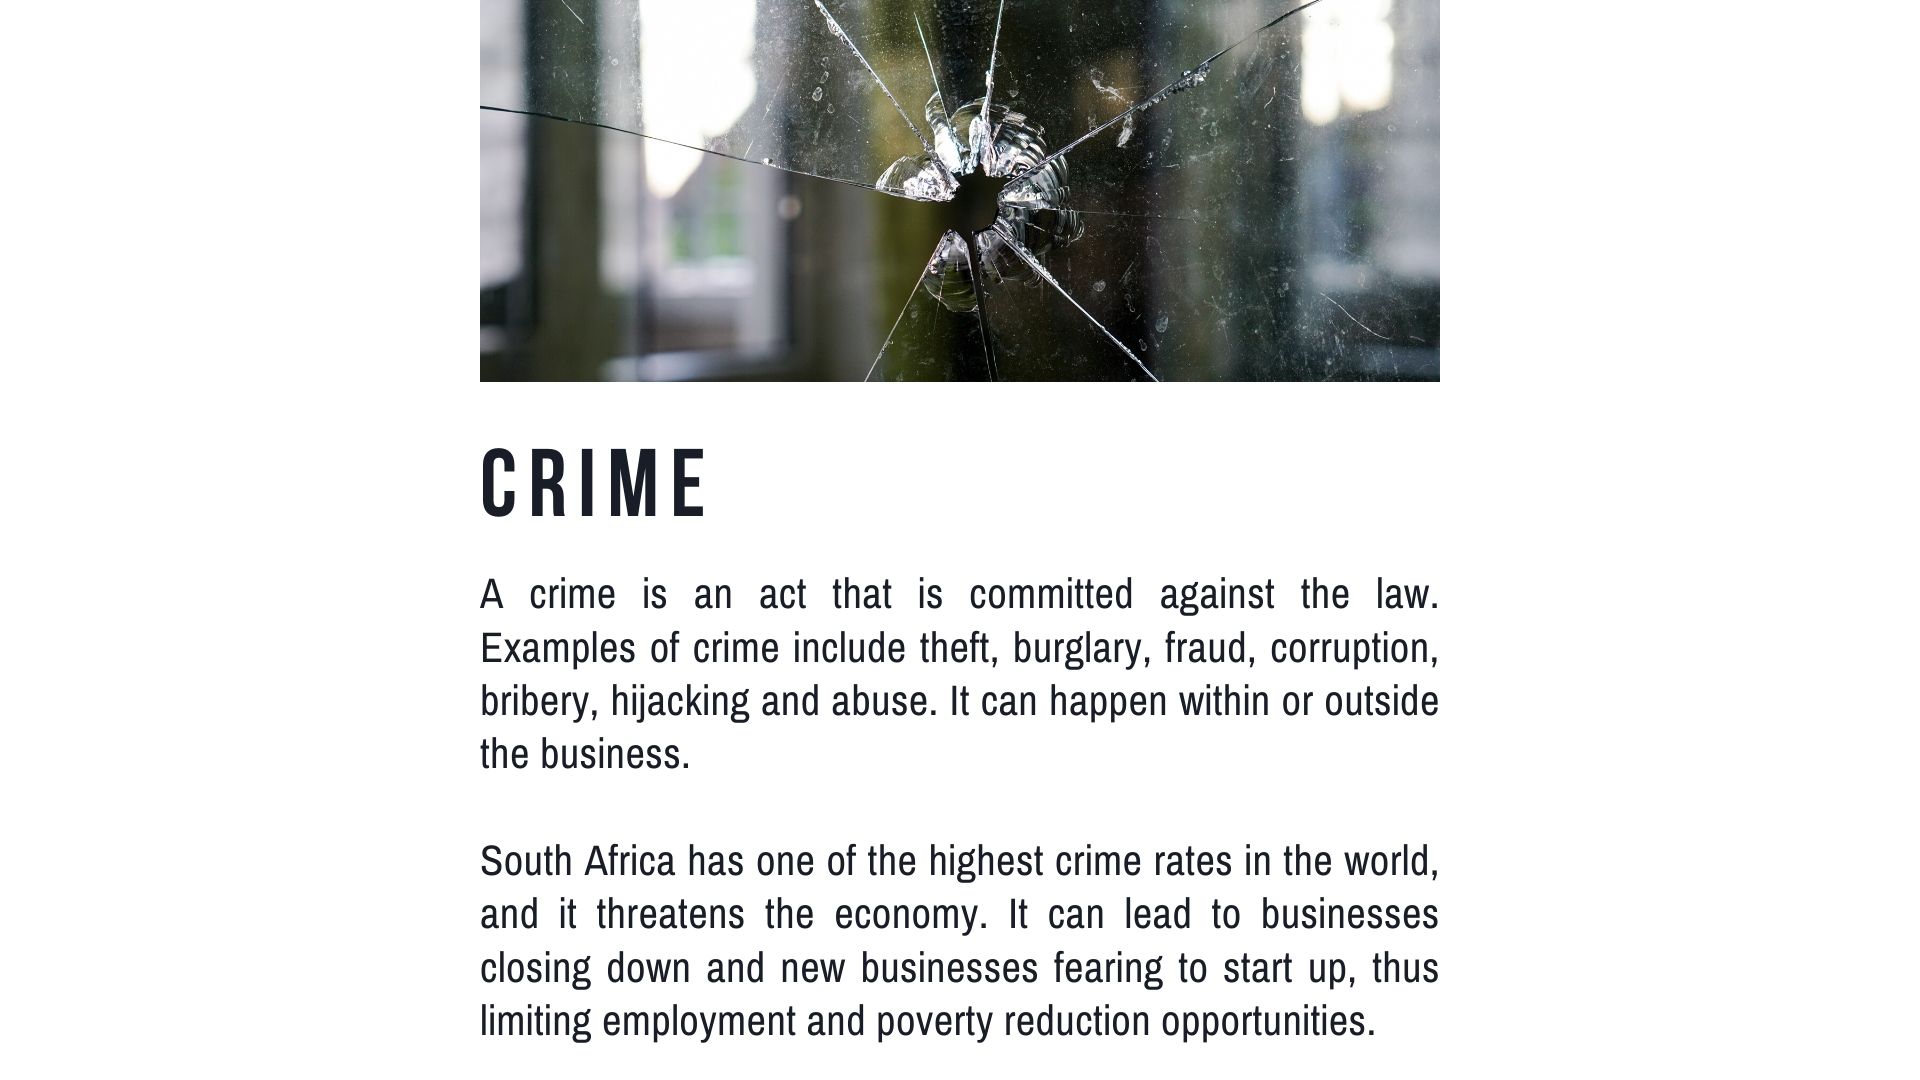 List of South African Contemporary Socio-Economic Issues - Definition and explanation of crime